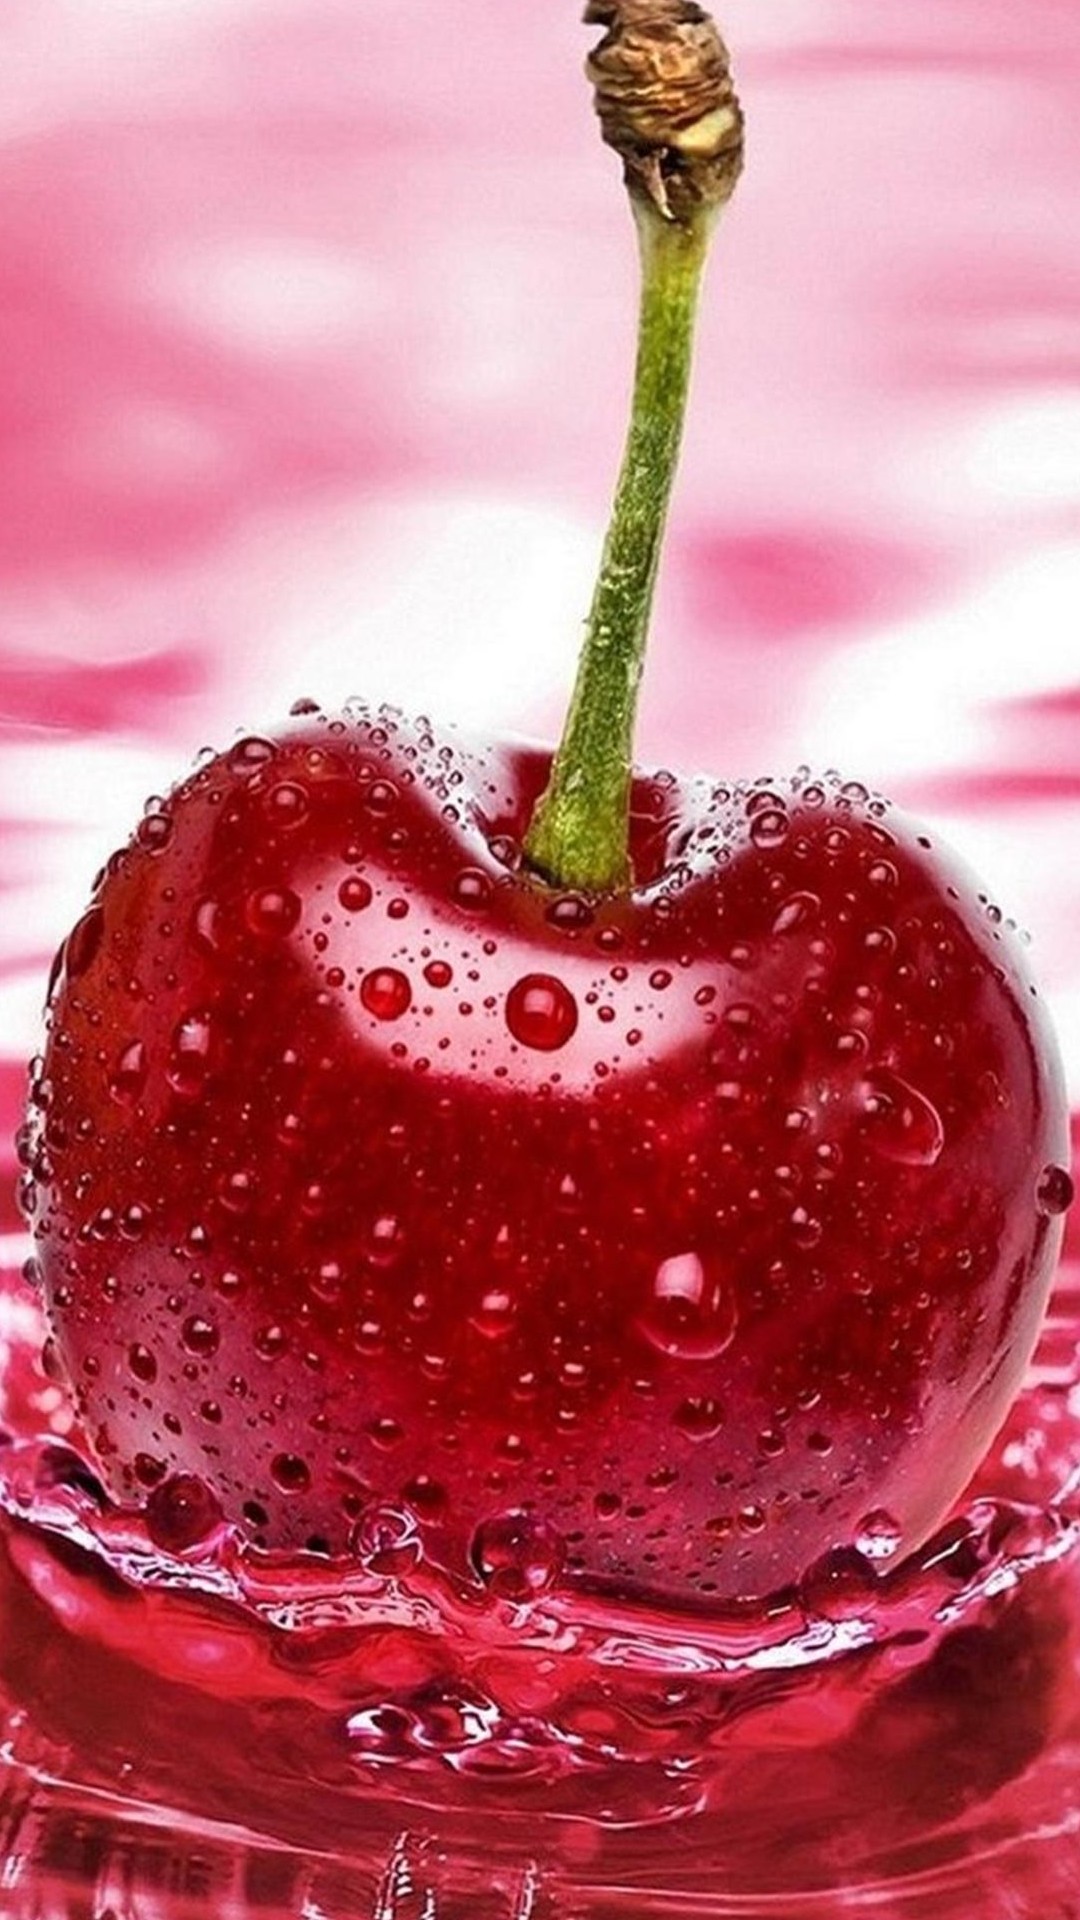 cherry mobile wallpaper,food,fruit,natural foods,cherry,plant